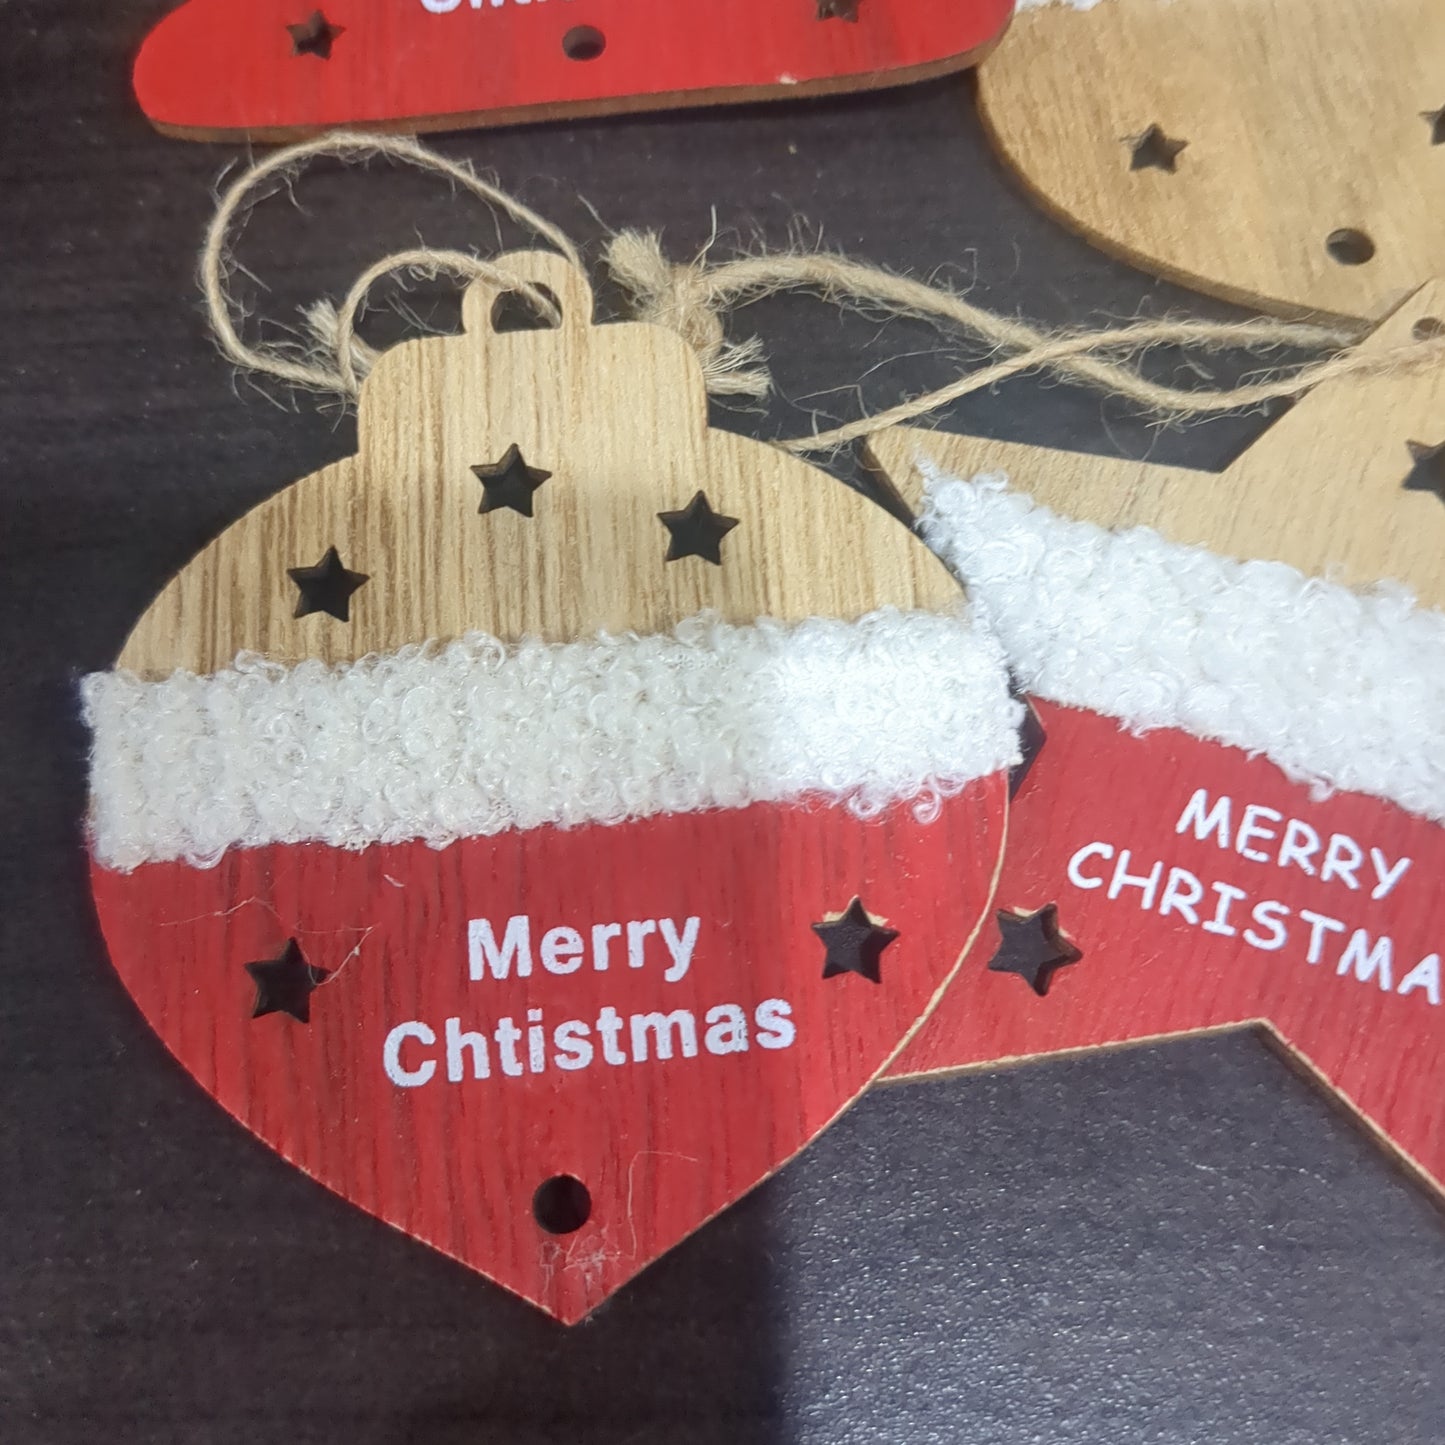 Set of 4 Wooden ornaments painted with furry trim